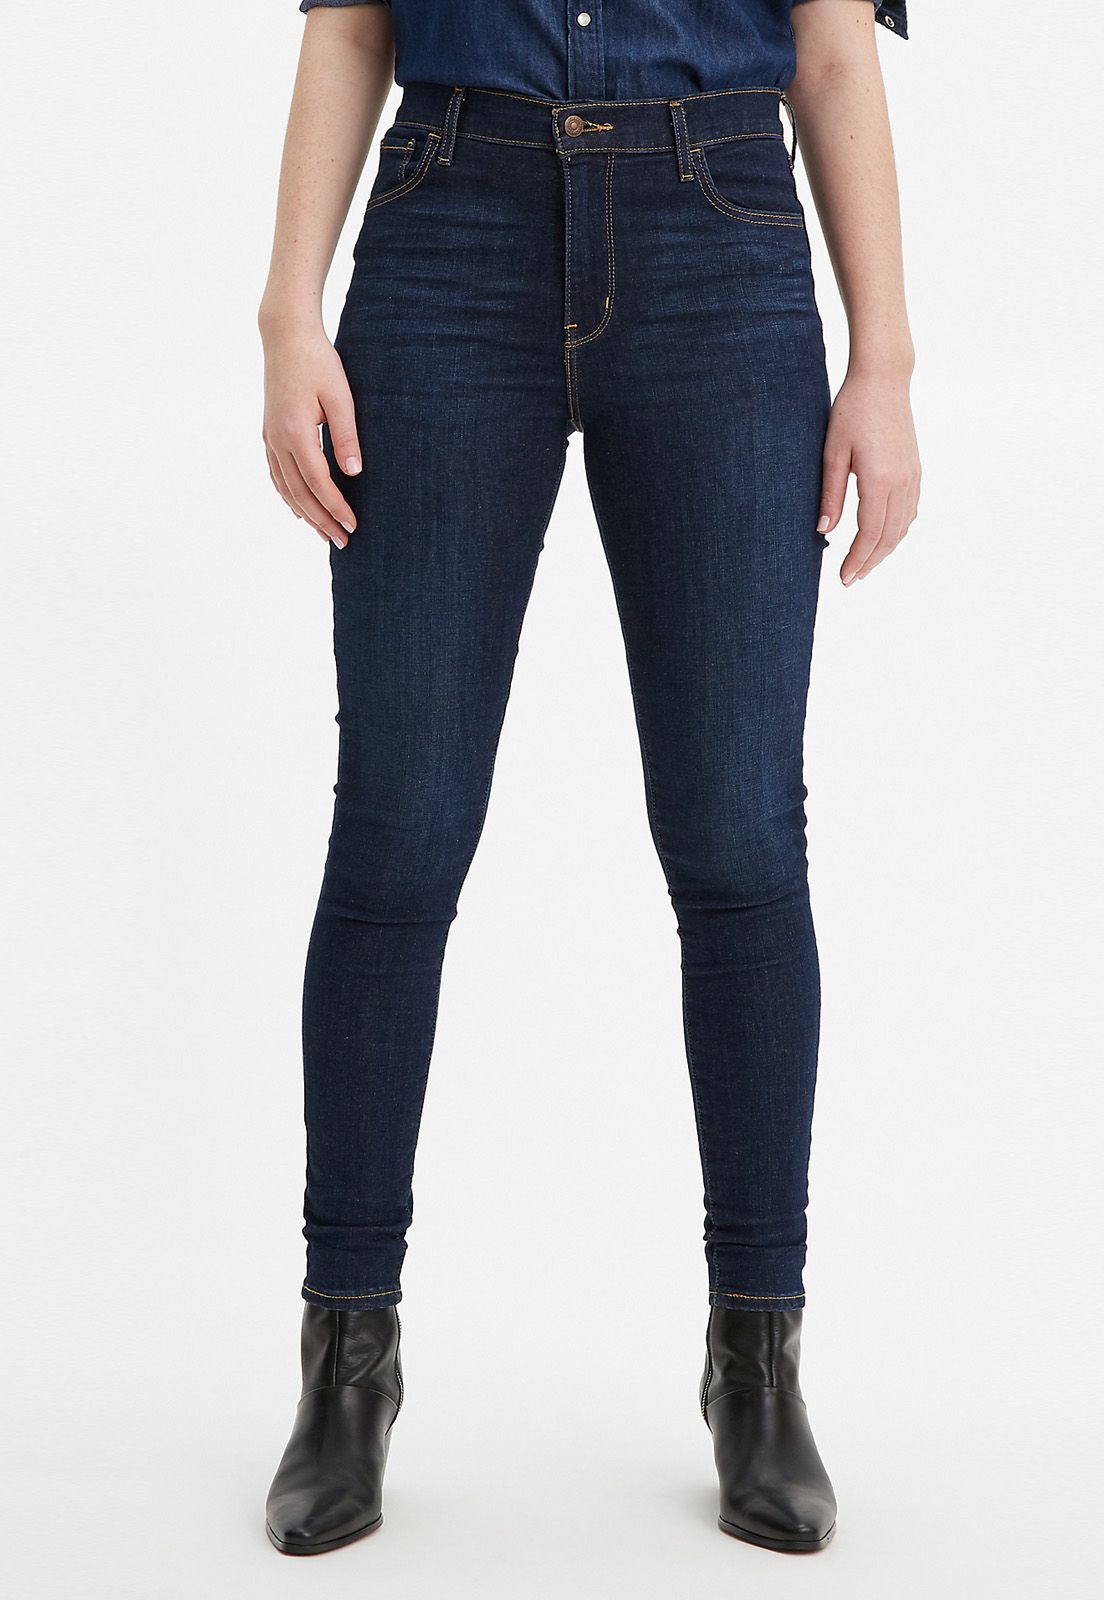 Jeans Mujer 720 High-Rise Super Skinny Azul Levis 52797-0024 - Jeans y  Pantalones